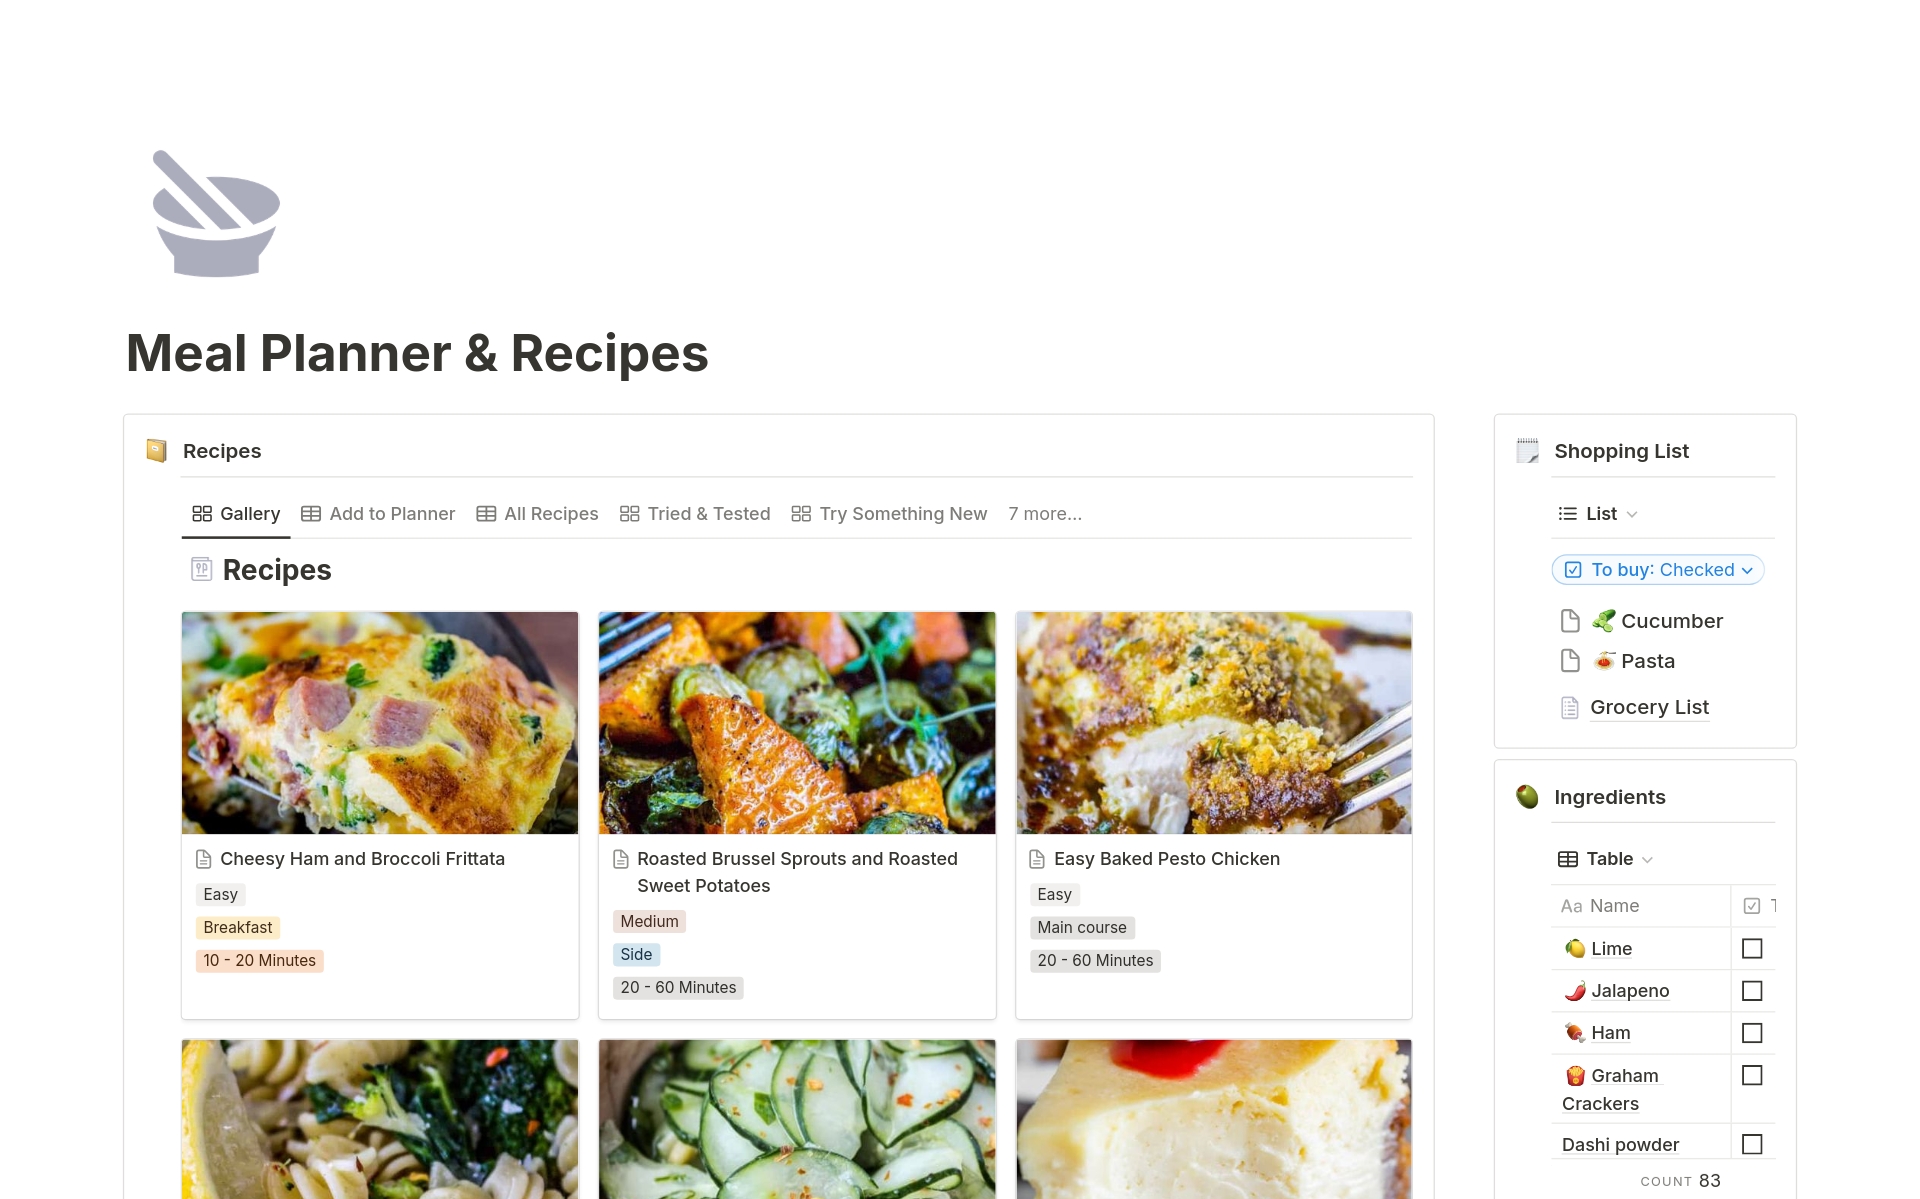 What you can do:
Add new recipes
Plan your meals weekly by course type (breakfast, main course, dinner, etc.)
Grow your list of ingredients
Easily add ingredients to the shopping list
Filter your recipes easily by ingredients, course, cuisine, time, difficulty, etc.